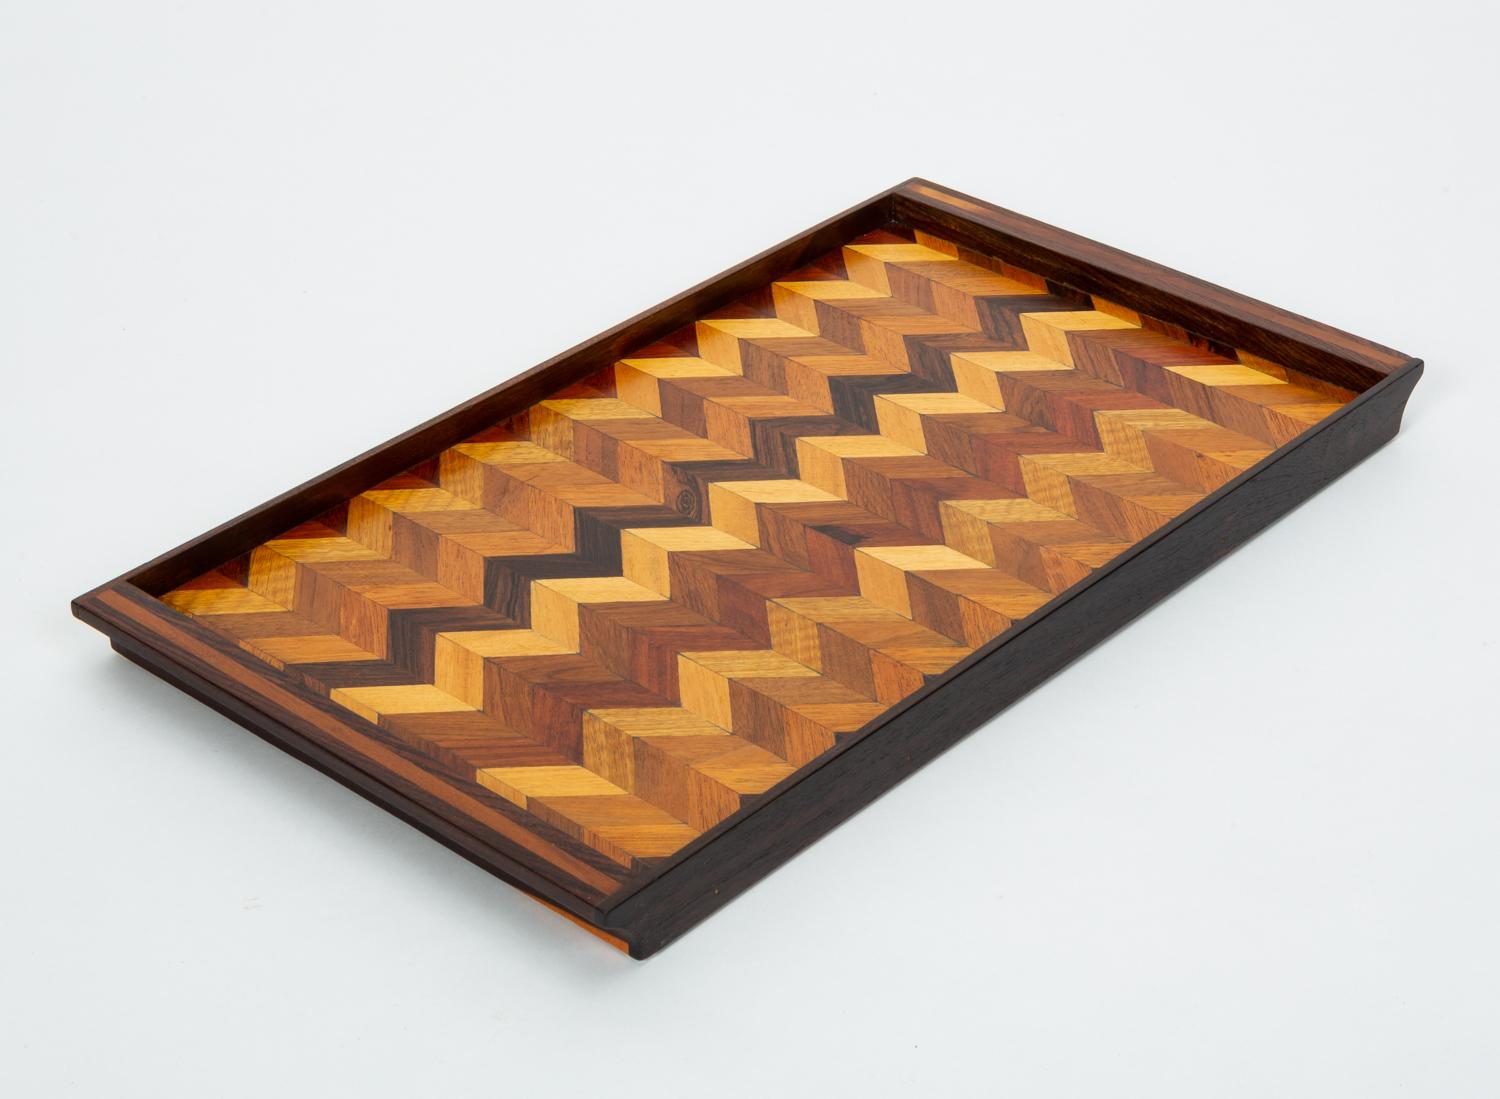 Marquetry Inlaid Tray with Chevron Pattern by Don Shoemaker for Senal